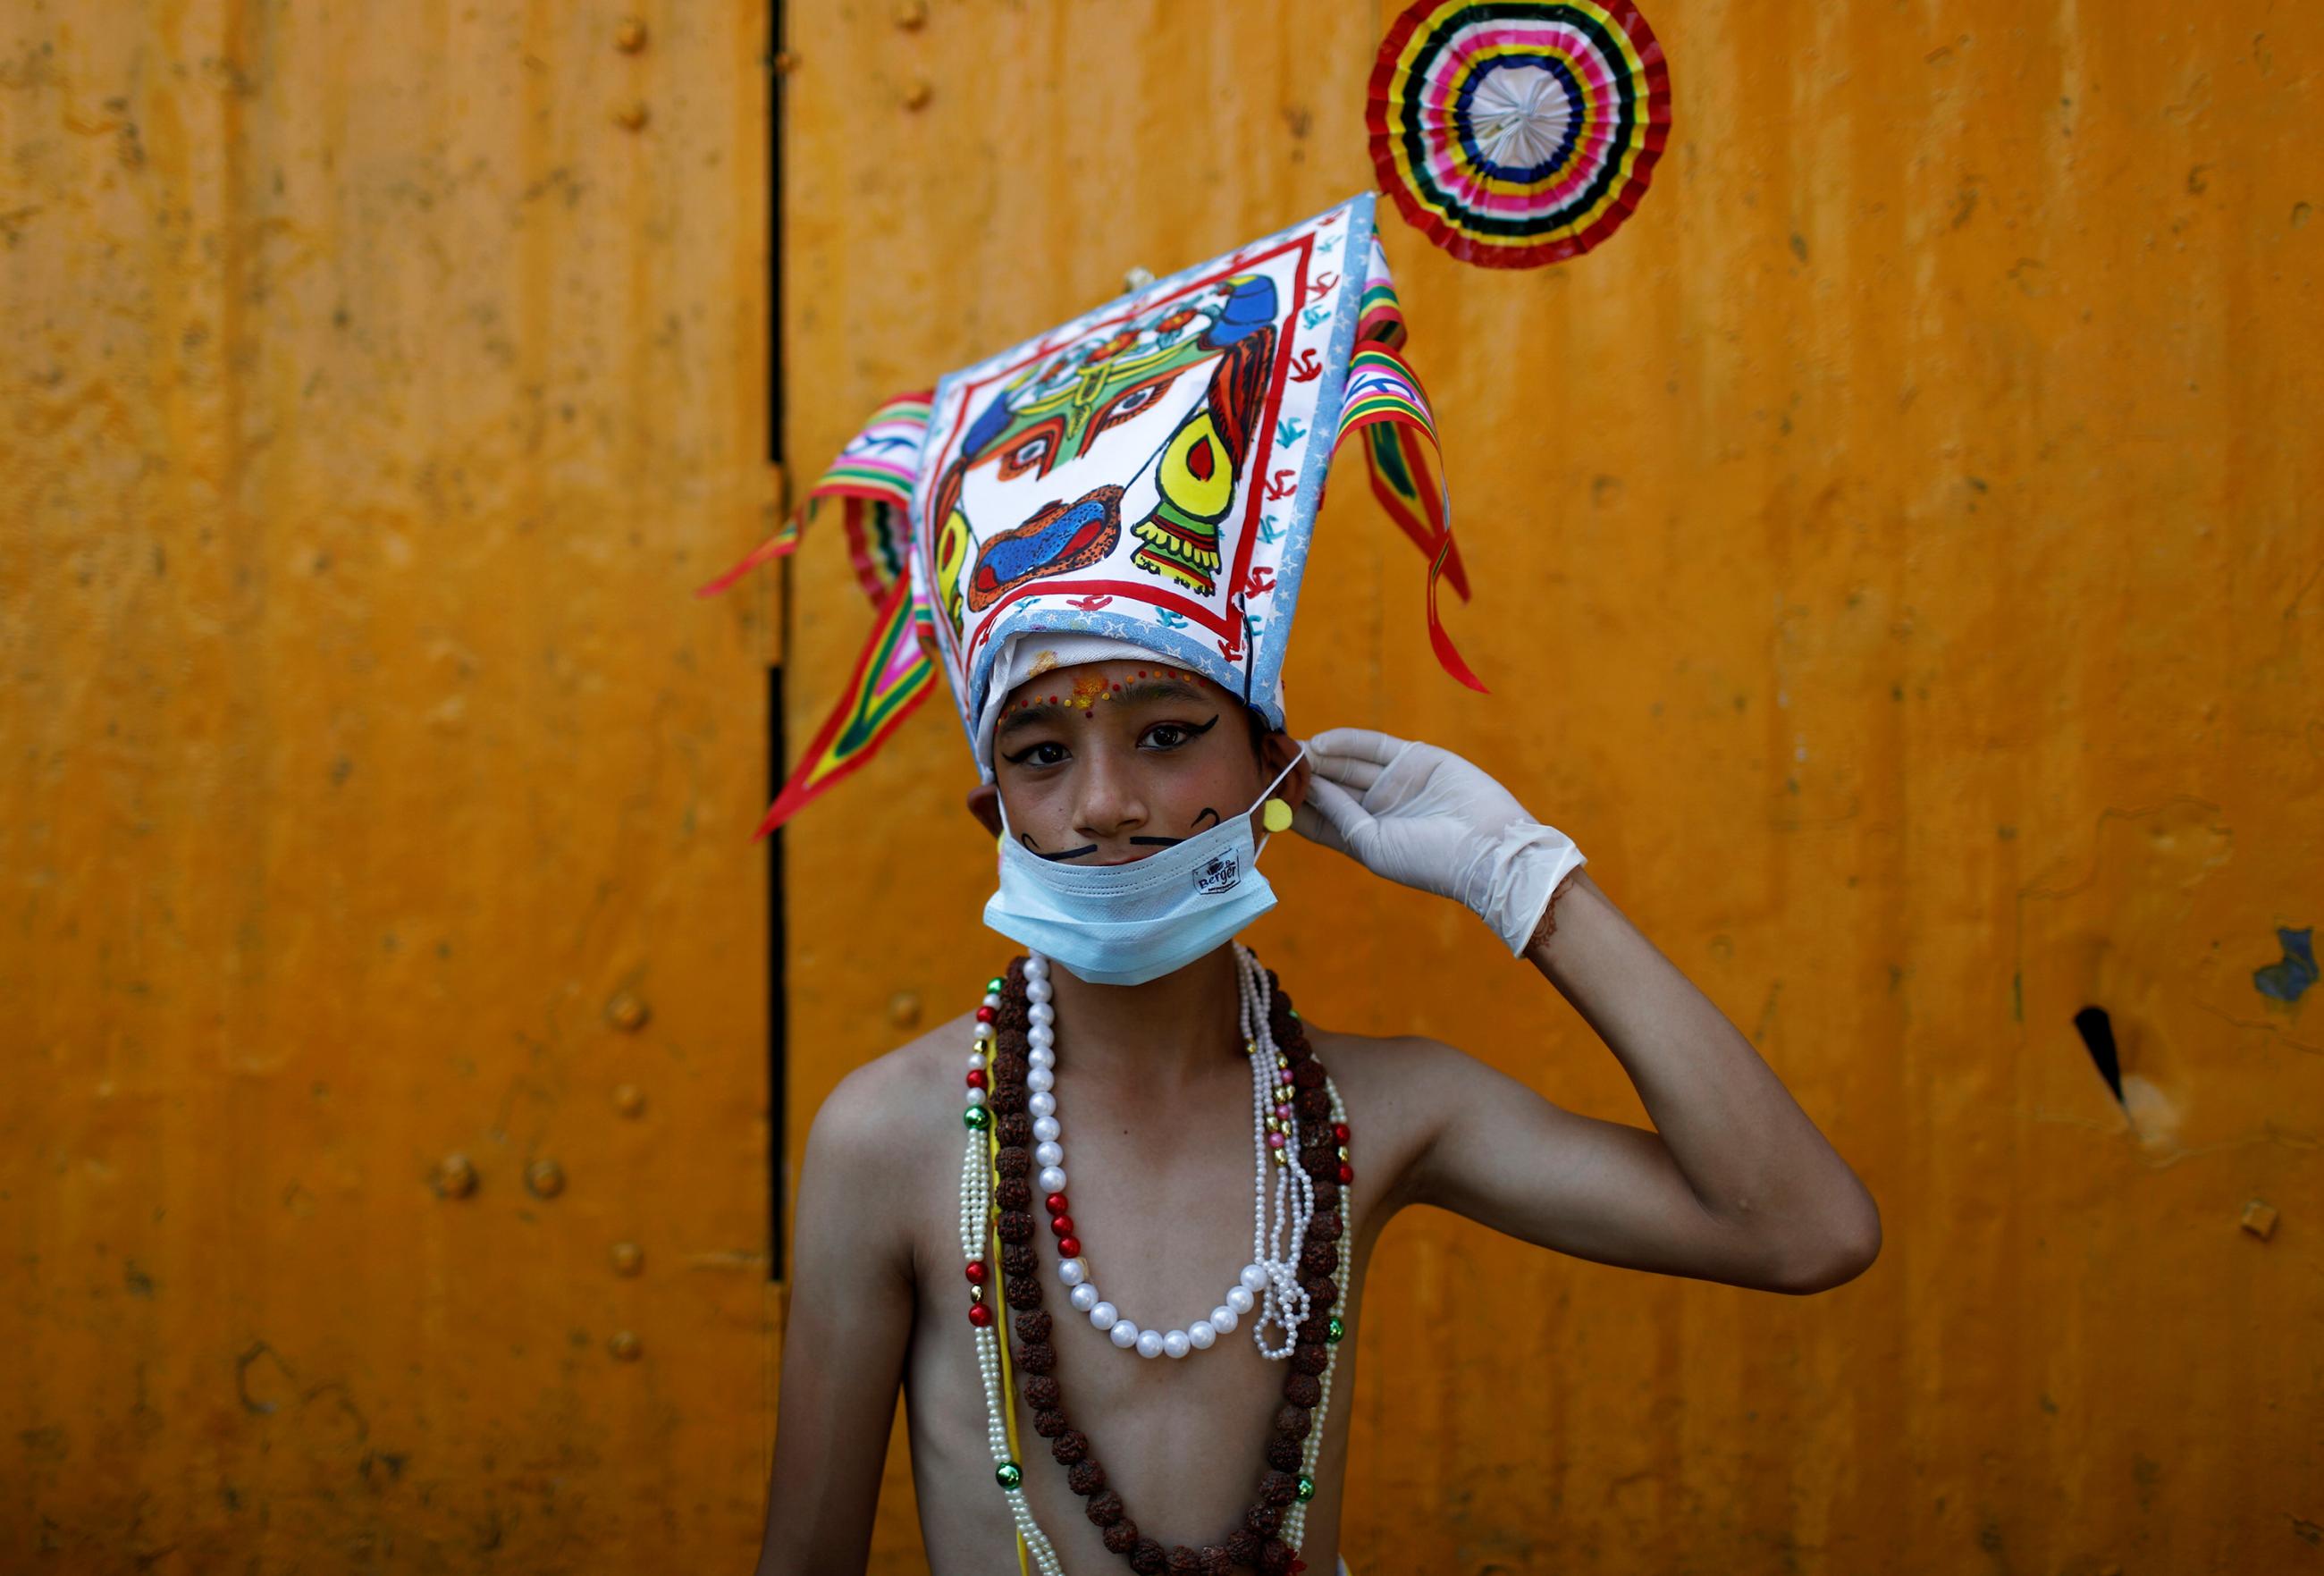 The photo shows a boy in a colorful costume and a surgical facemask during a festival in which people ask for salvation and peace for their departed loved ones. 